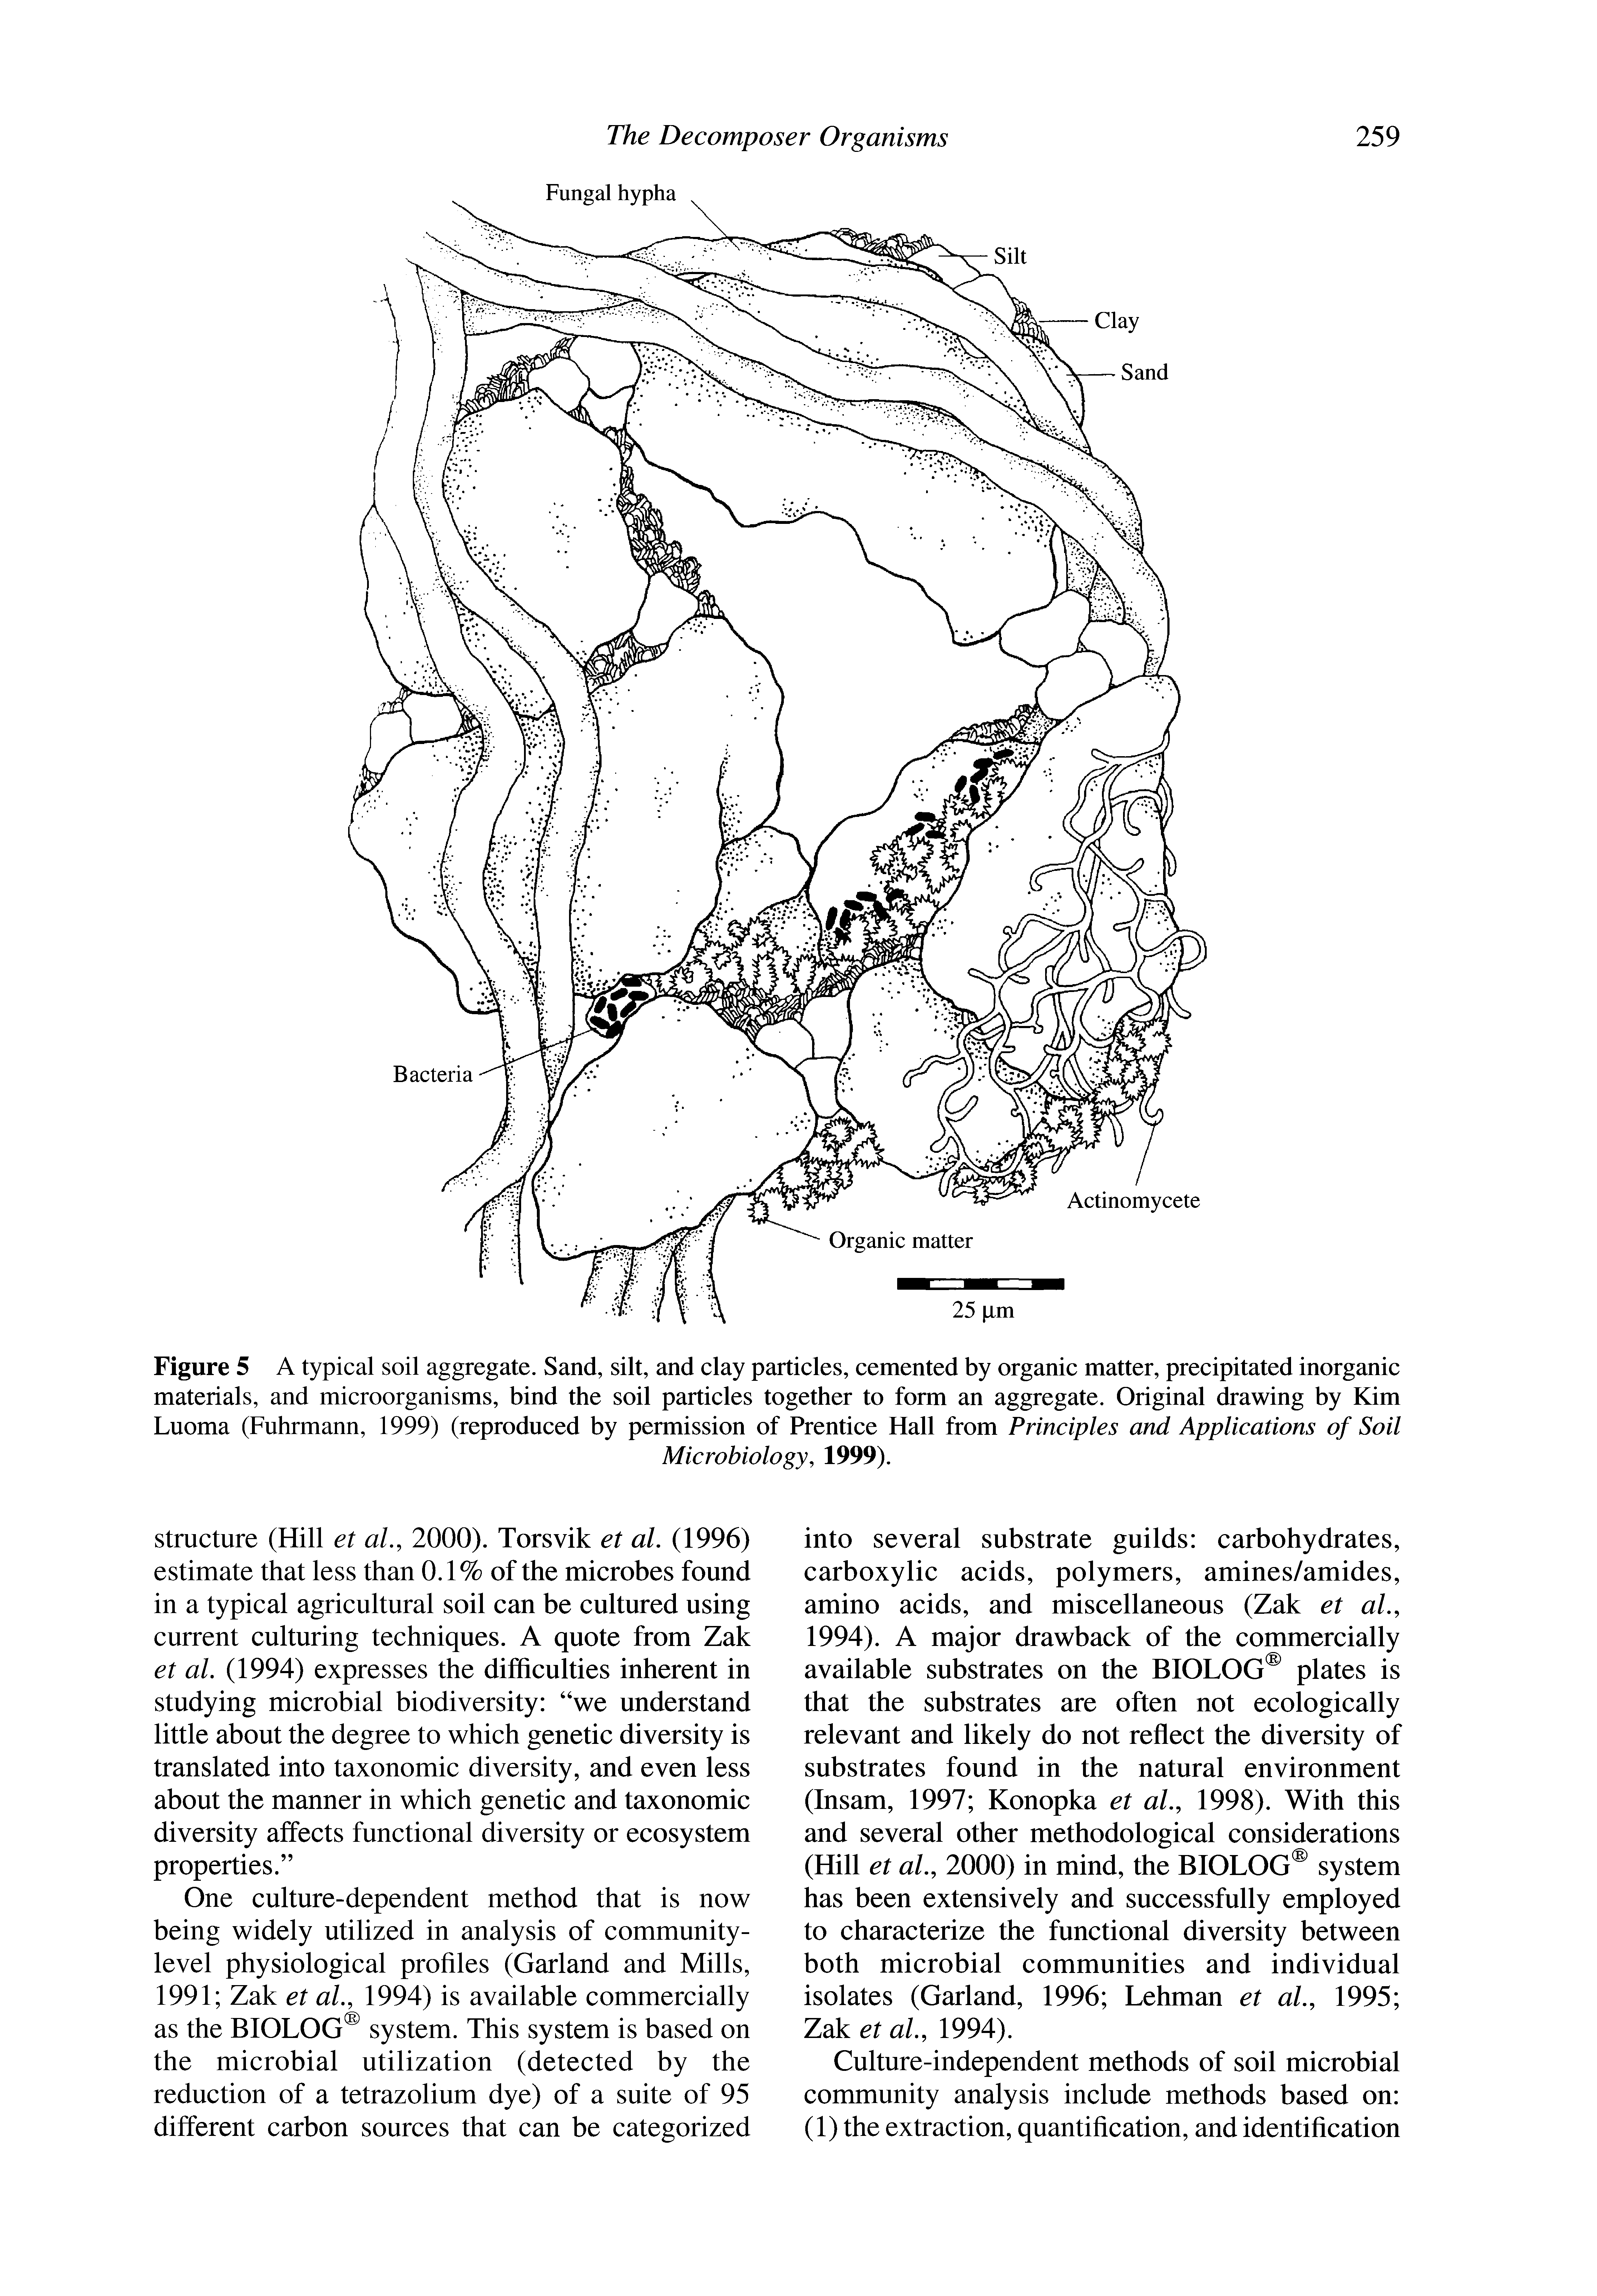 Figure 5 A typical soil aggregate. Sand, silt, and clay particles, cemented by organic matter, precipitated inorganic materials, and microorganisms, bind the soil particles together to form an aggregate. Original drawing by Kim Luoma (Fuhrmann, 1999) (reproduced by permission of Prentice Hall from Principles and Applications of Soil...